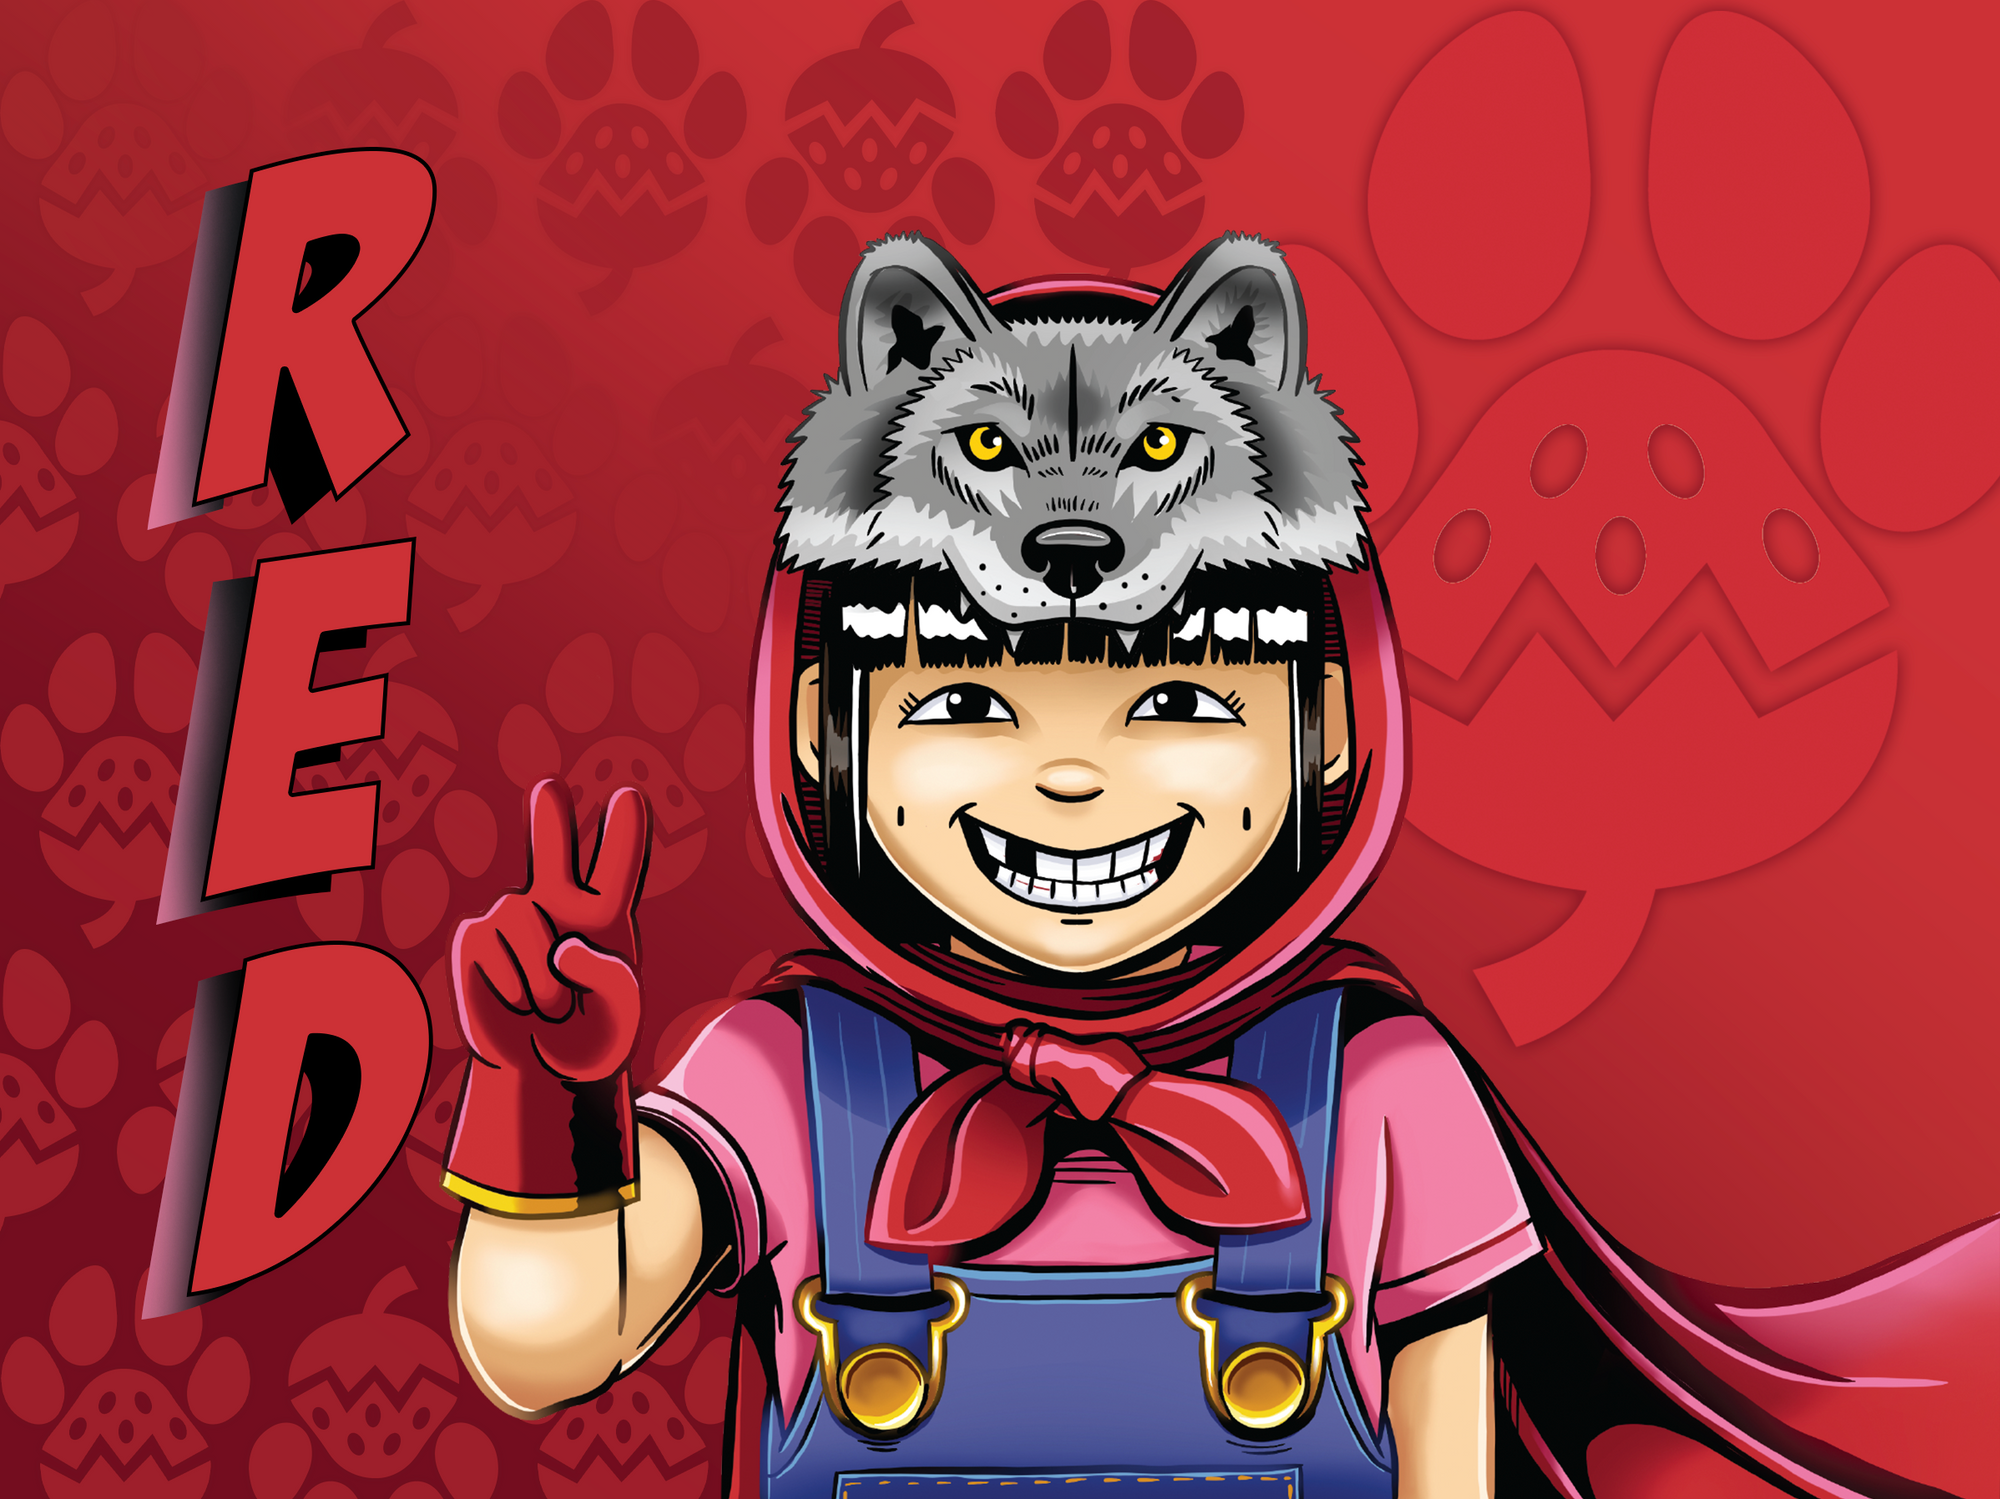 Comic style folk lore character, wearing wolf hat and candy apple red cape with berry wolf footprint icon in background, with name title Red